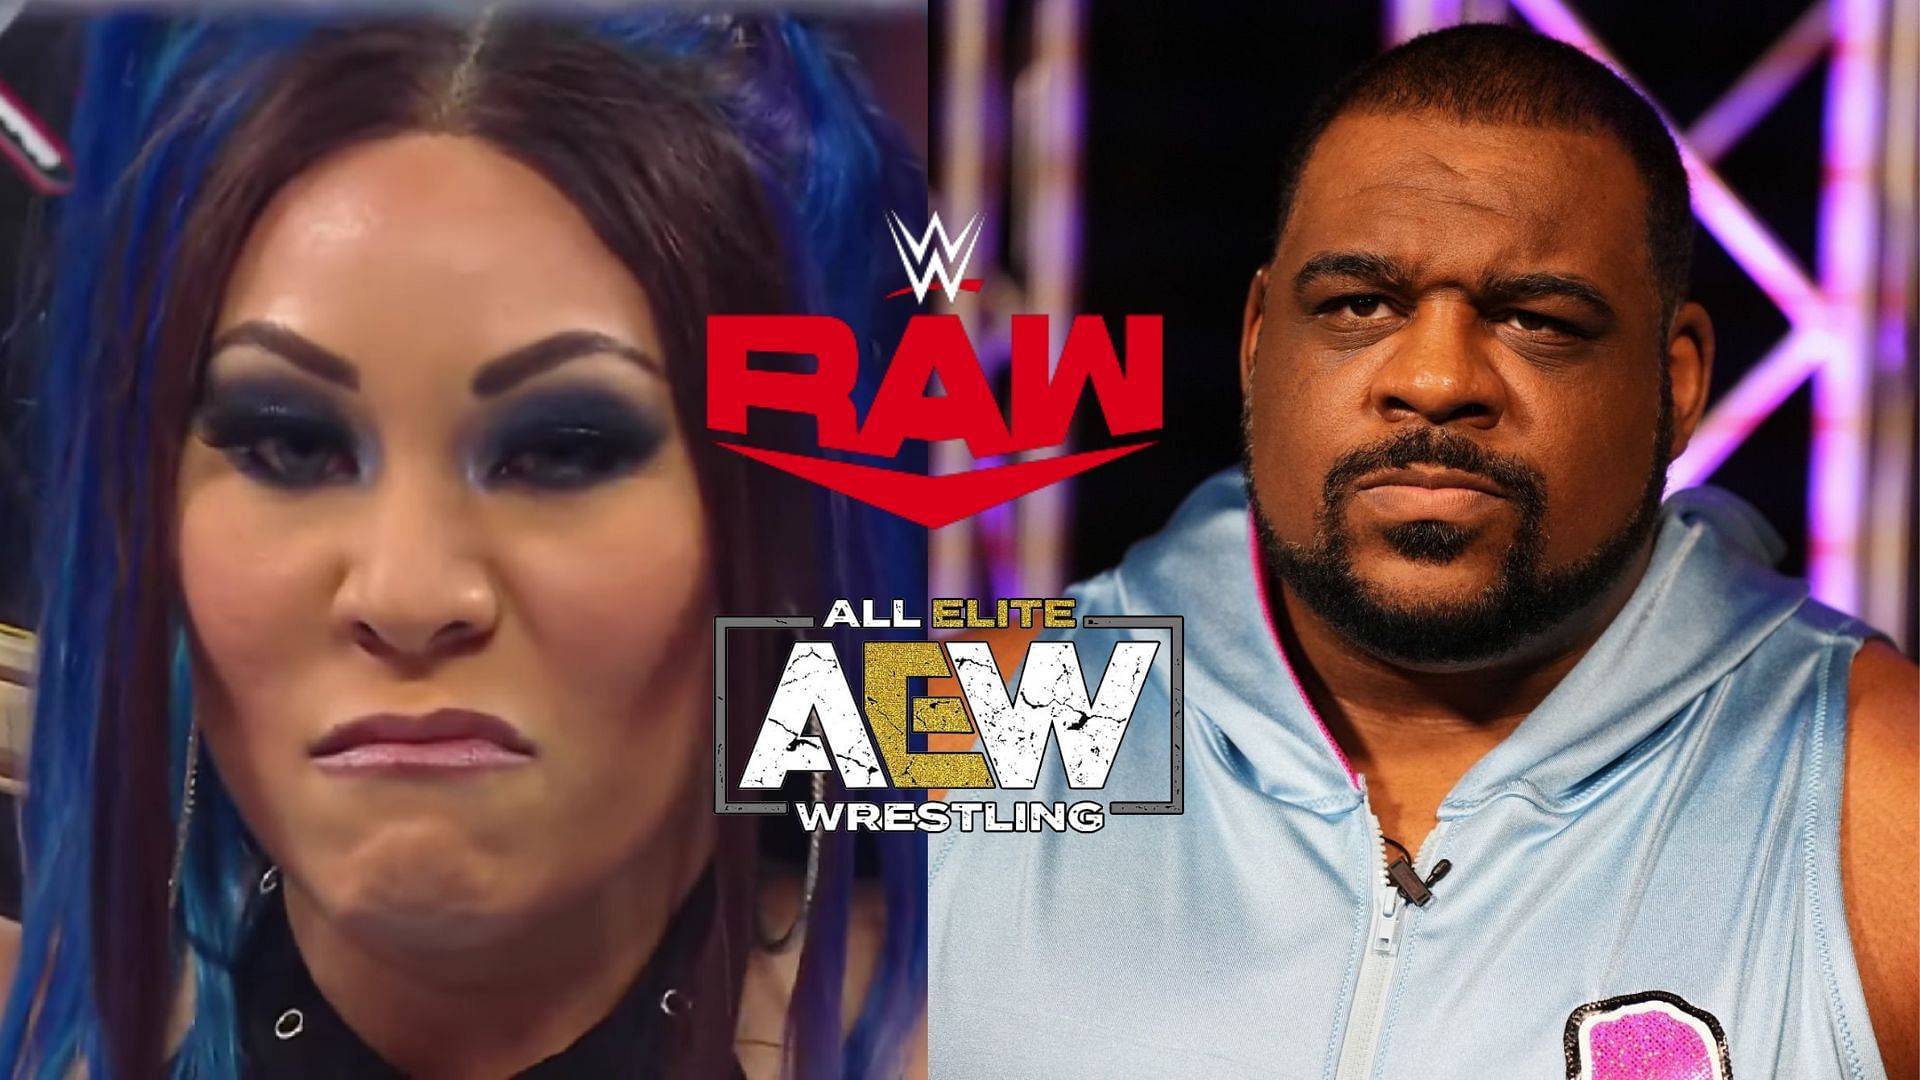 AEW star Keith Lee reacts to his wife Mia Yim's surprising WWE return on RAW